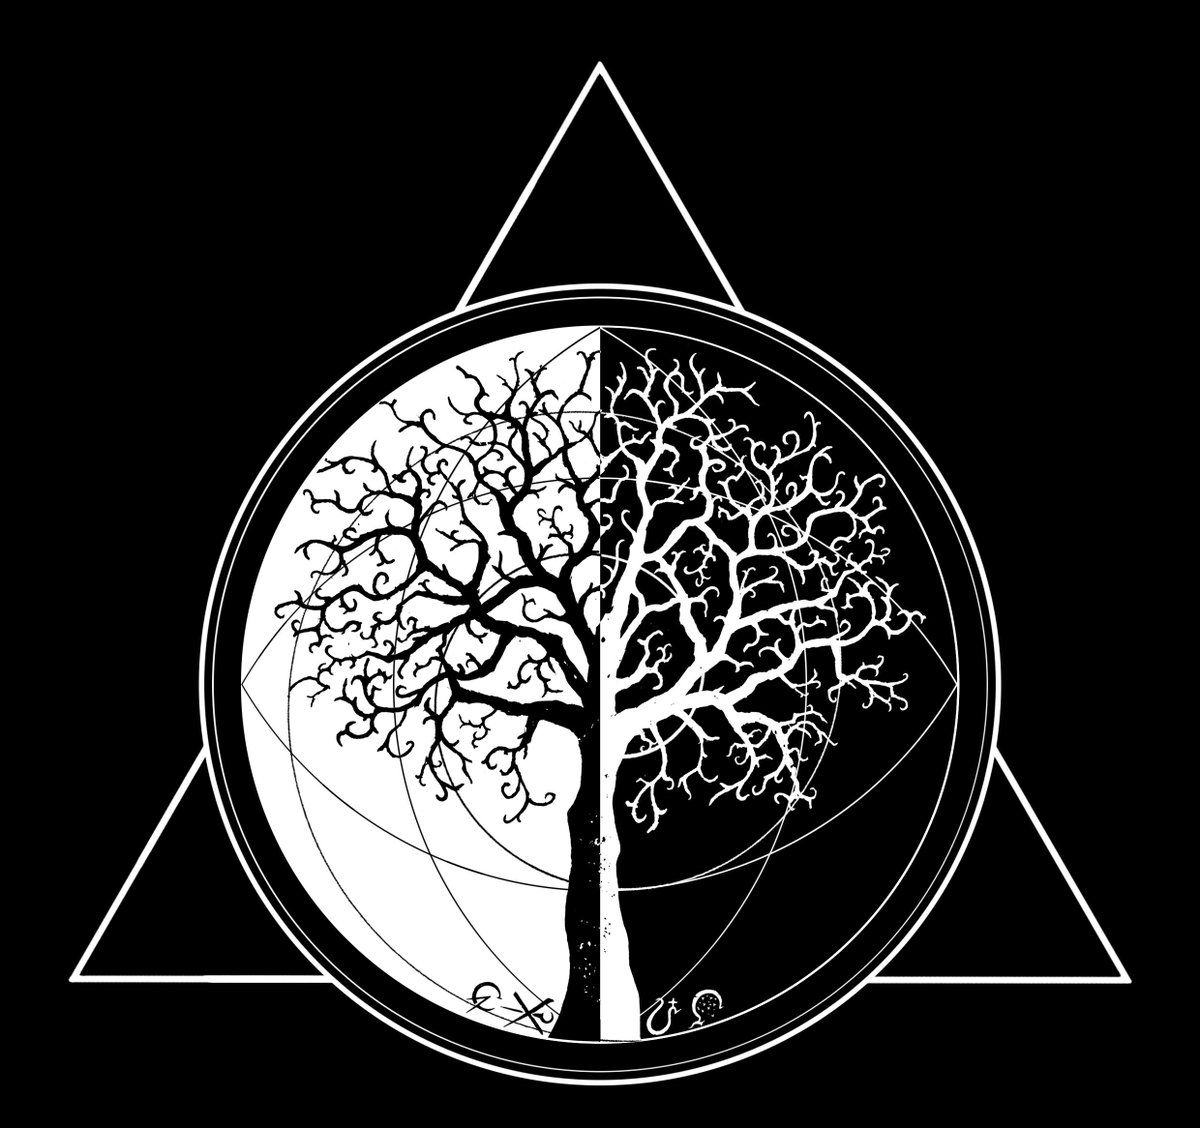 Raincrow Studios on Twitter: "The Tree of Magic. Without light there would  be no dark. Without darkness, there would be no light. Without both, there  would be no balance. #covensart #gameart #gamelore #